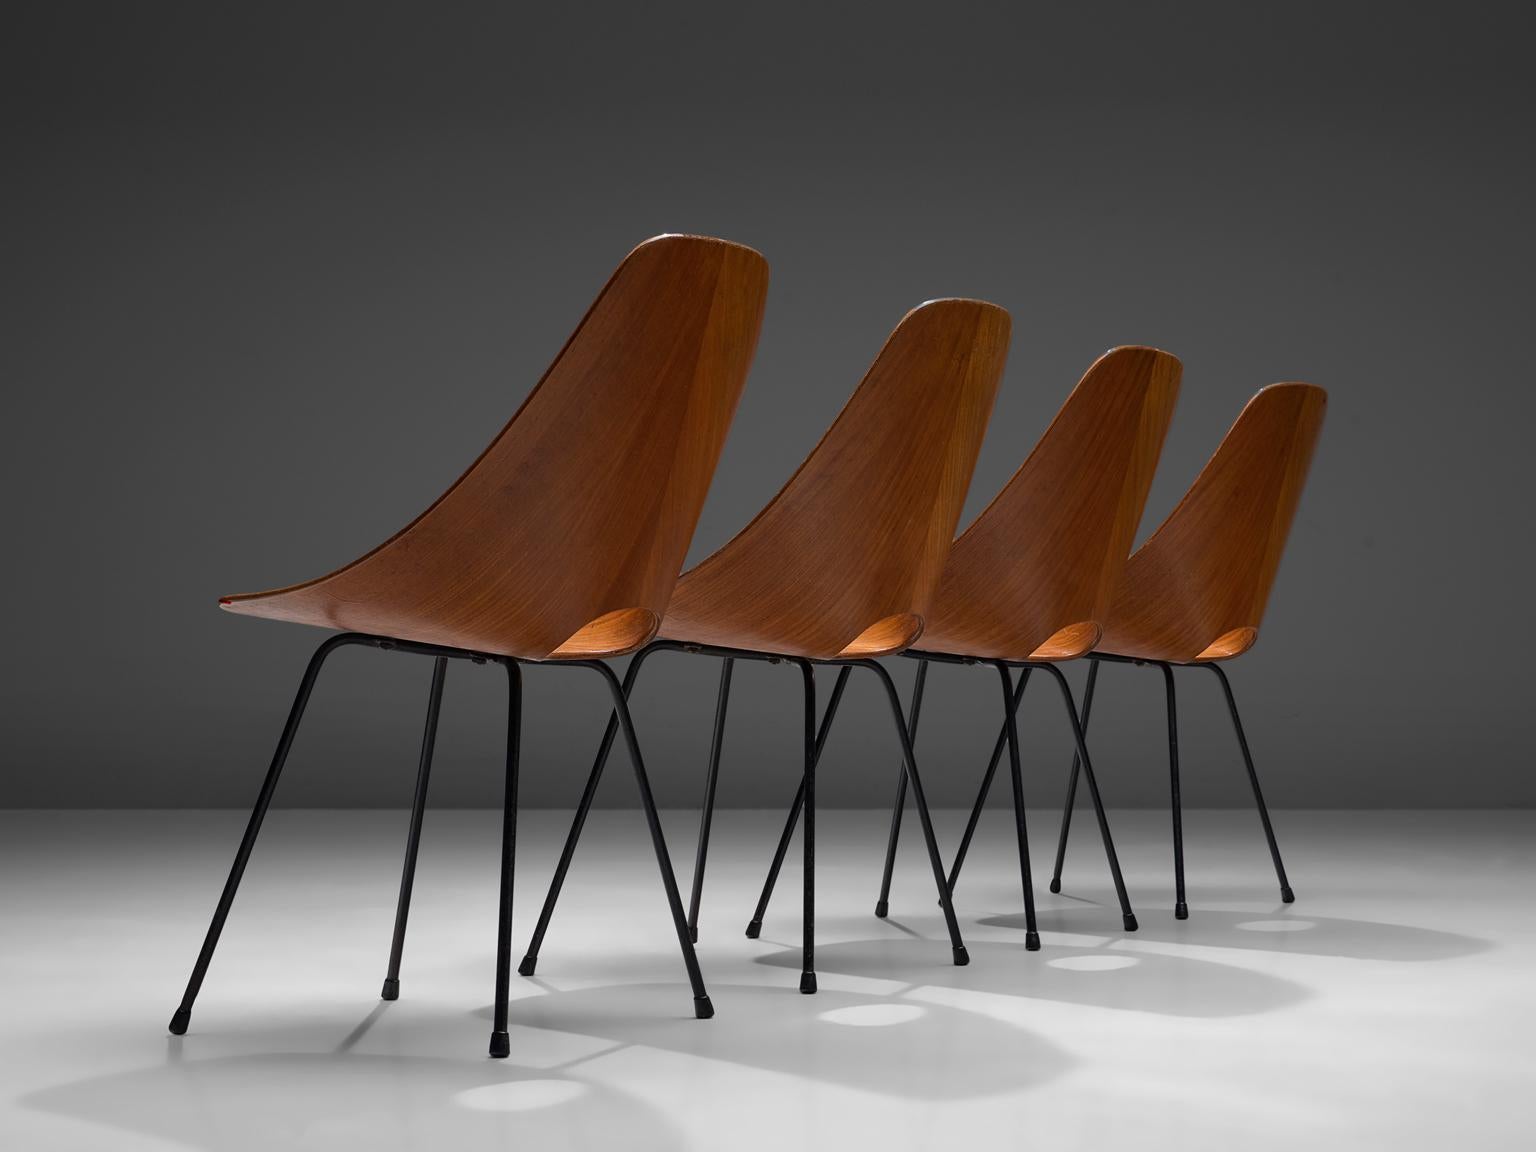 Vittorio Nobili for Tagliabue, set of four dining chairs 'Medea', teak and mahogany, Italy, 1955. 

This 'Medea' chair is designed by the Italian designer Vittorio Nobili. The plywood chairs are veneered in carefully chosen mahogany, which gives